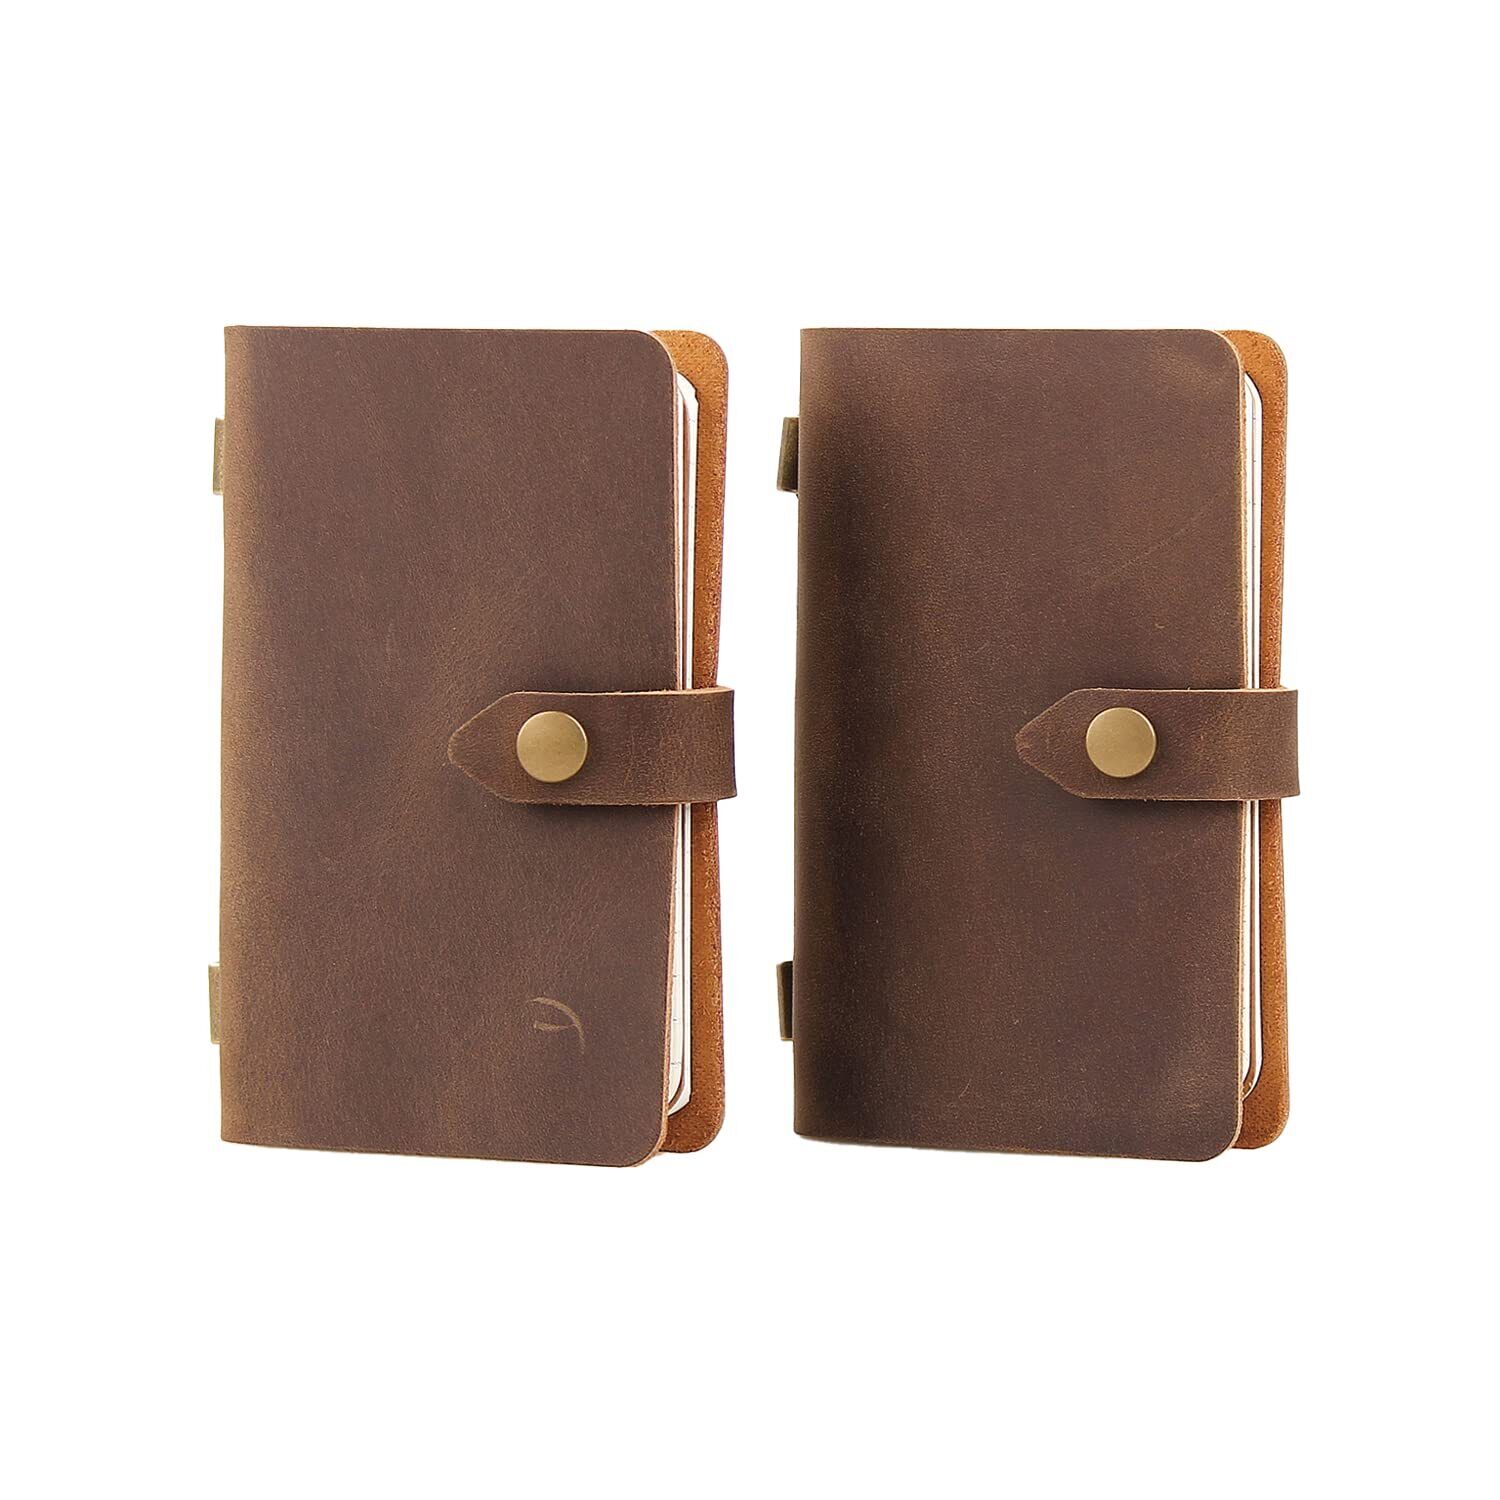 Leather Small Travel Journal Notebook Vintage Daily Journal notebook brown